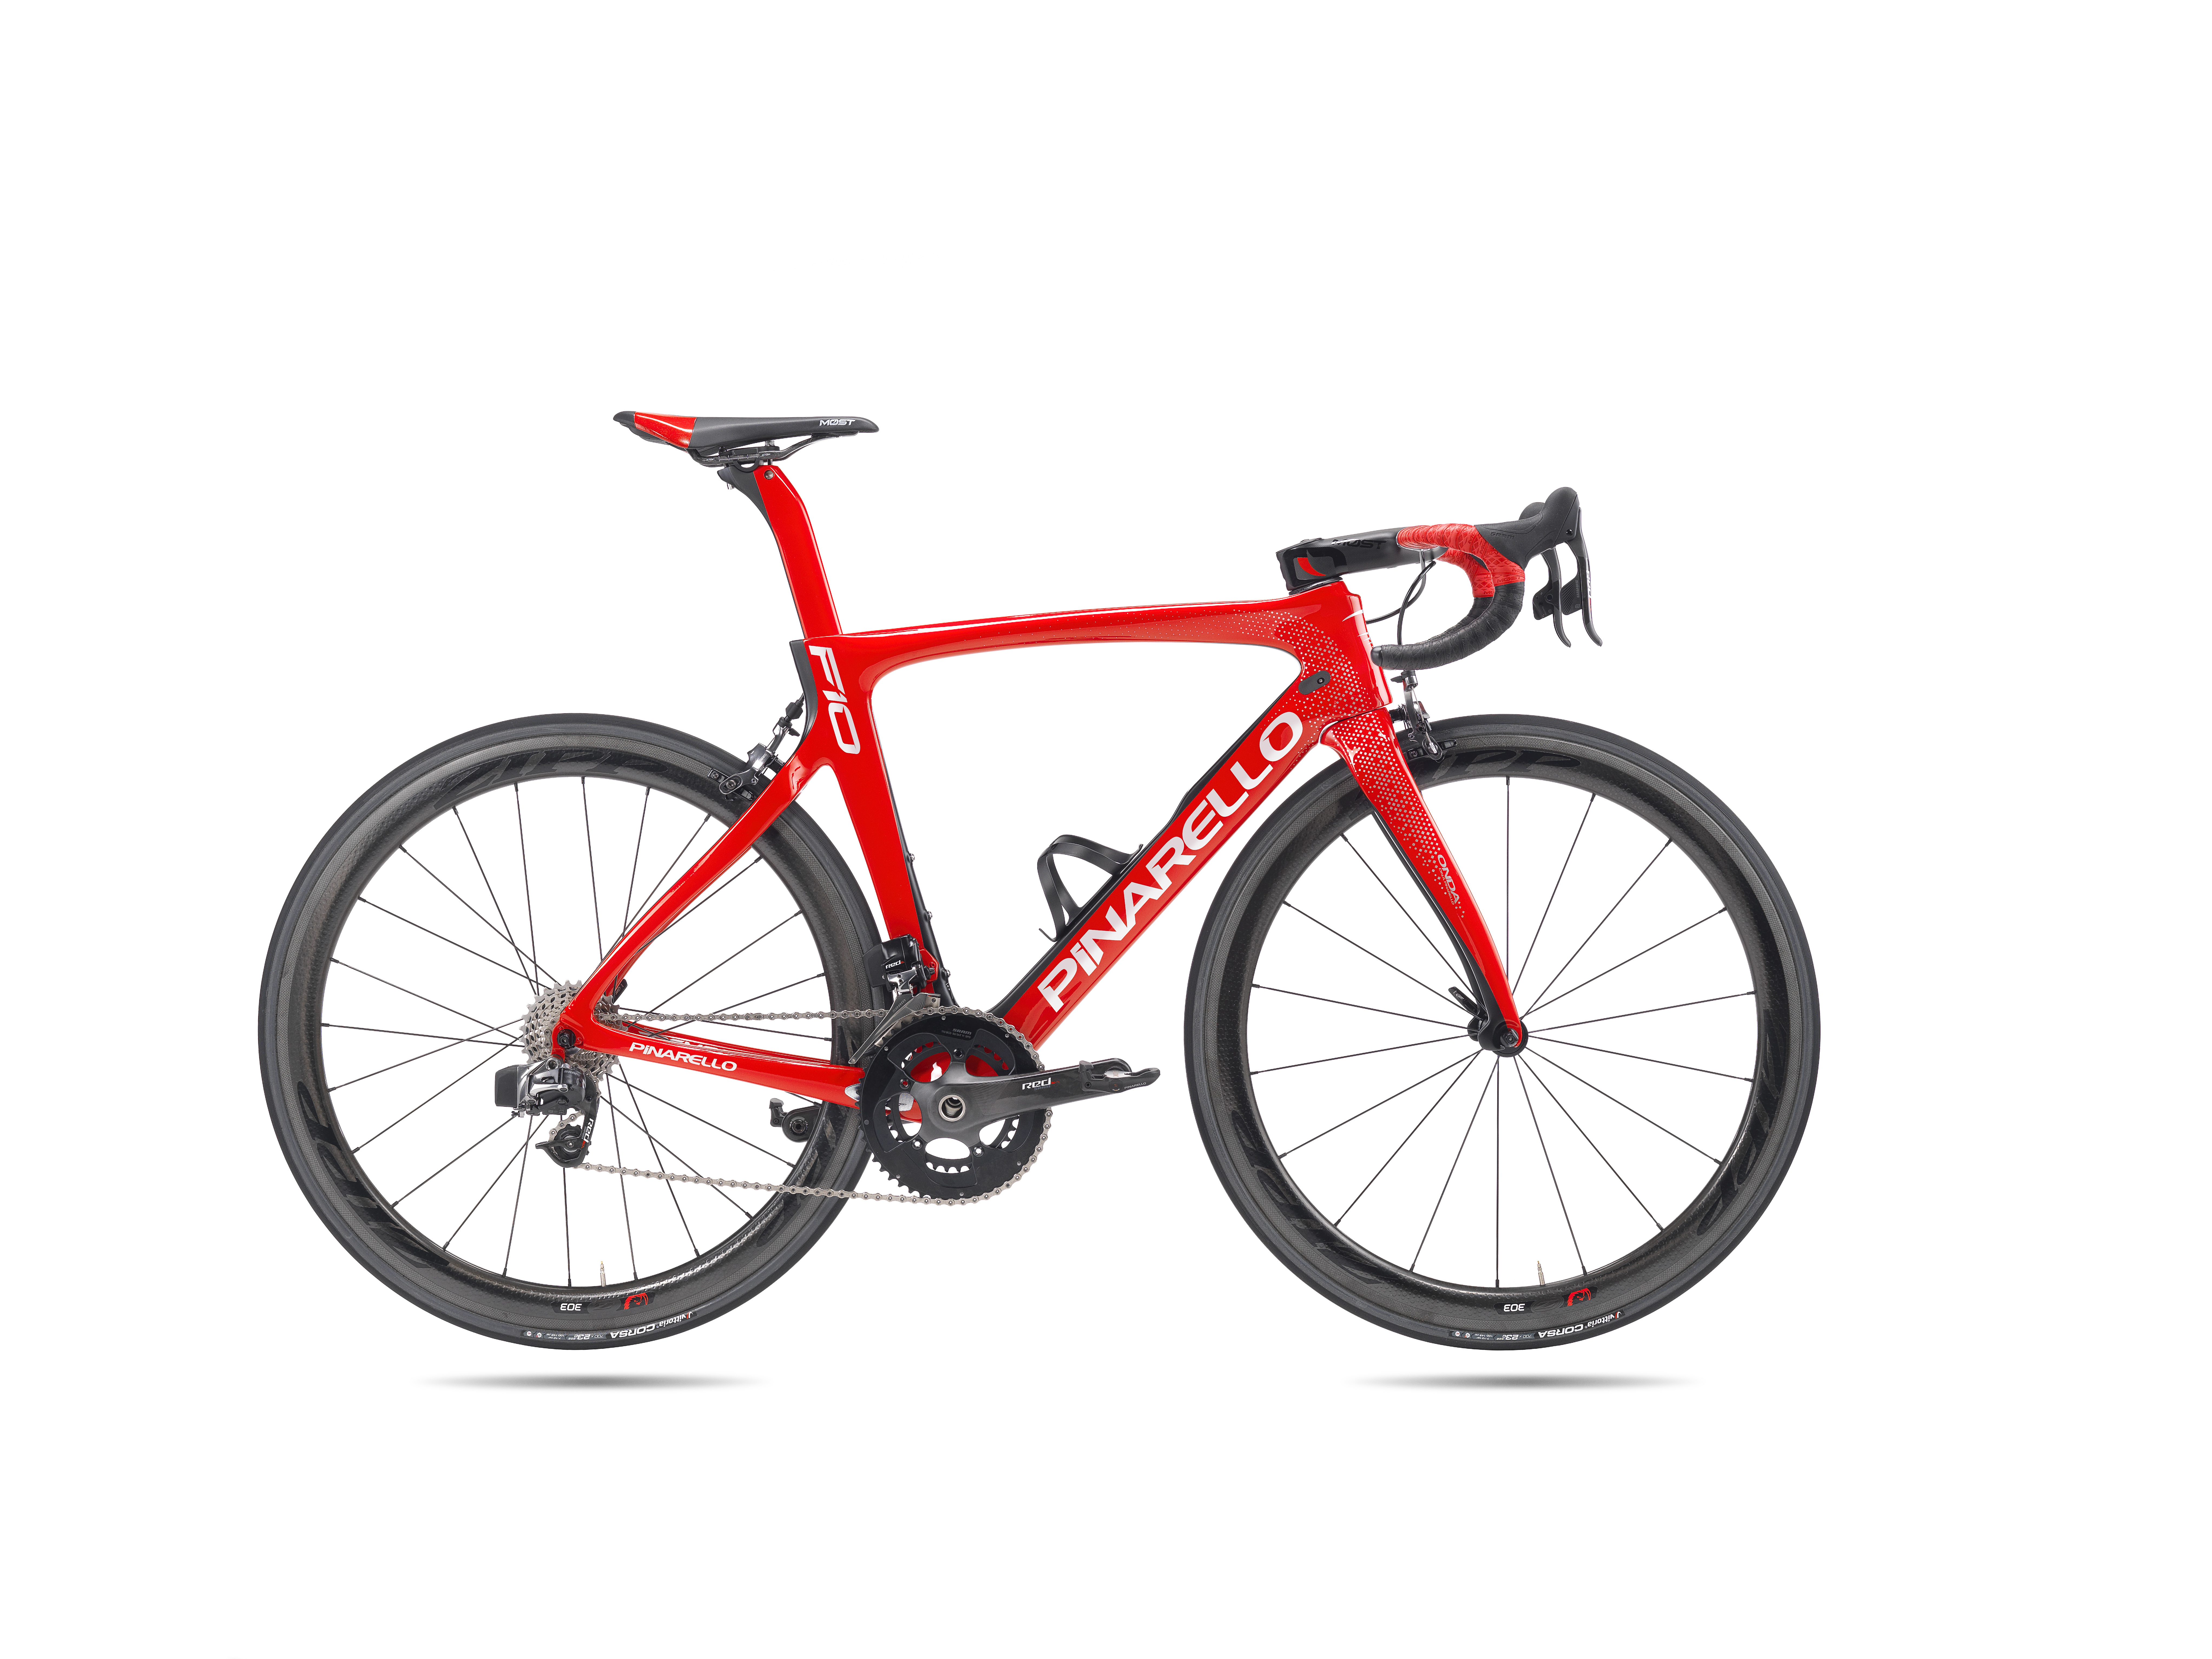 Pinarello launches new Dogma F10 | Bicycle Retailer and ...